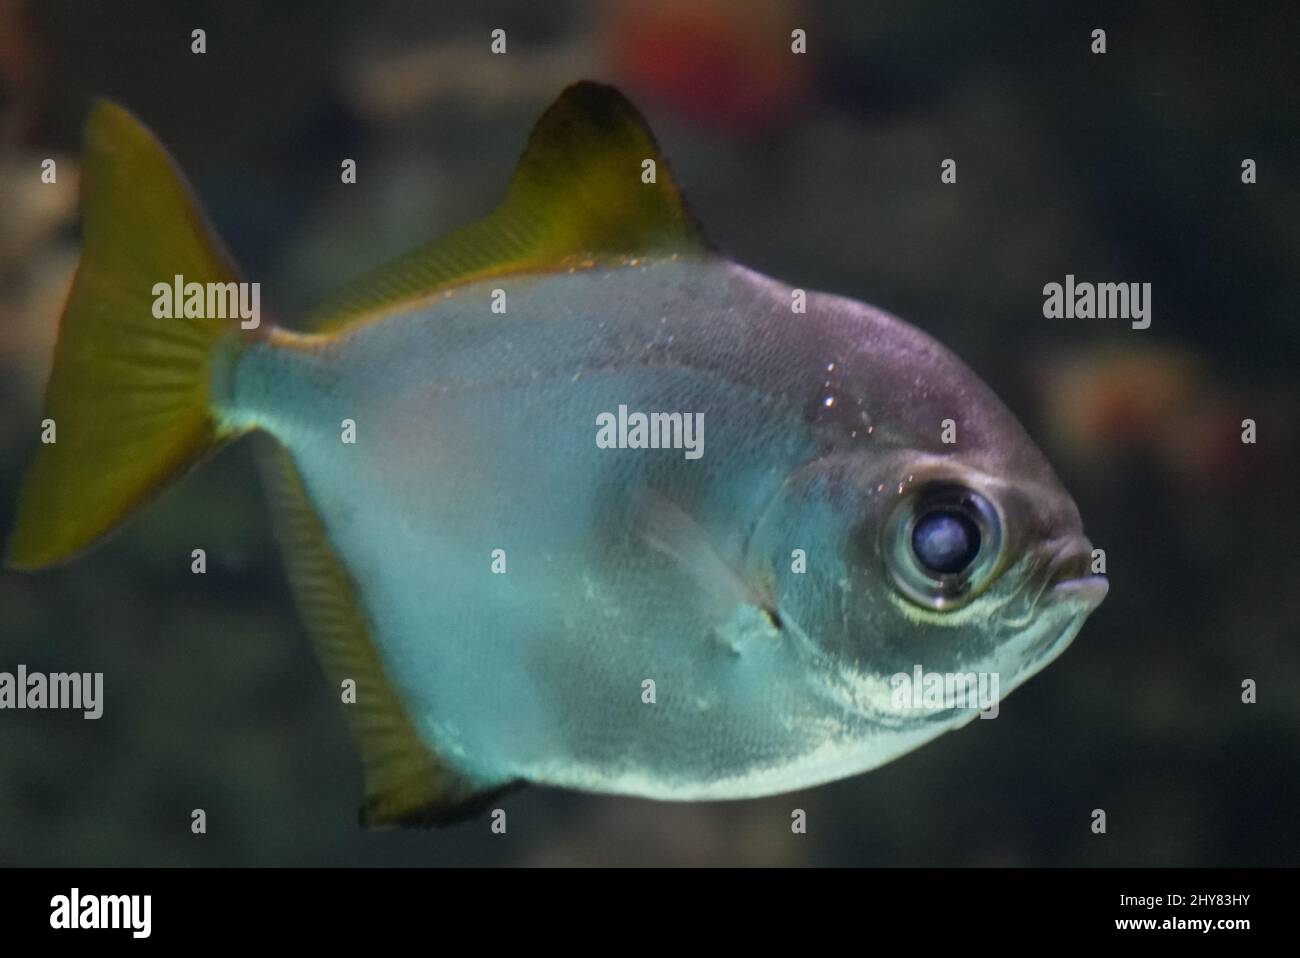 Close-up shot of Monodactylidae fish swimming in a crystal clear water on a blurred background Stock Photo